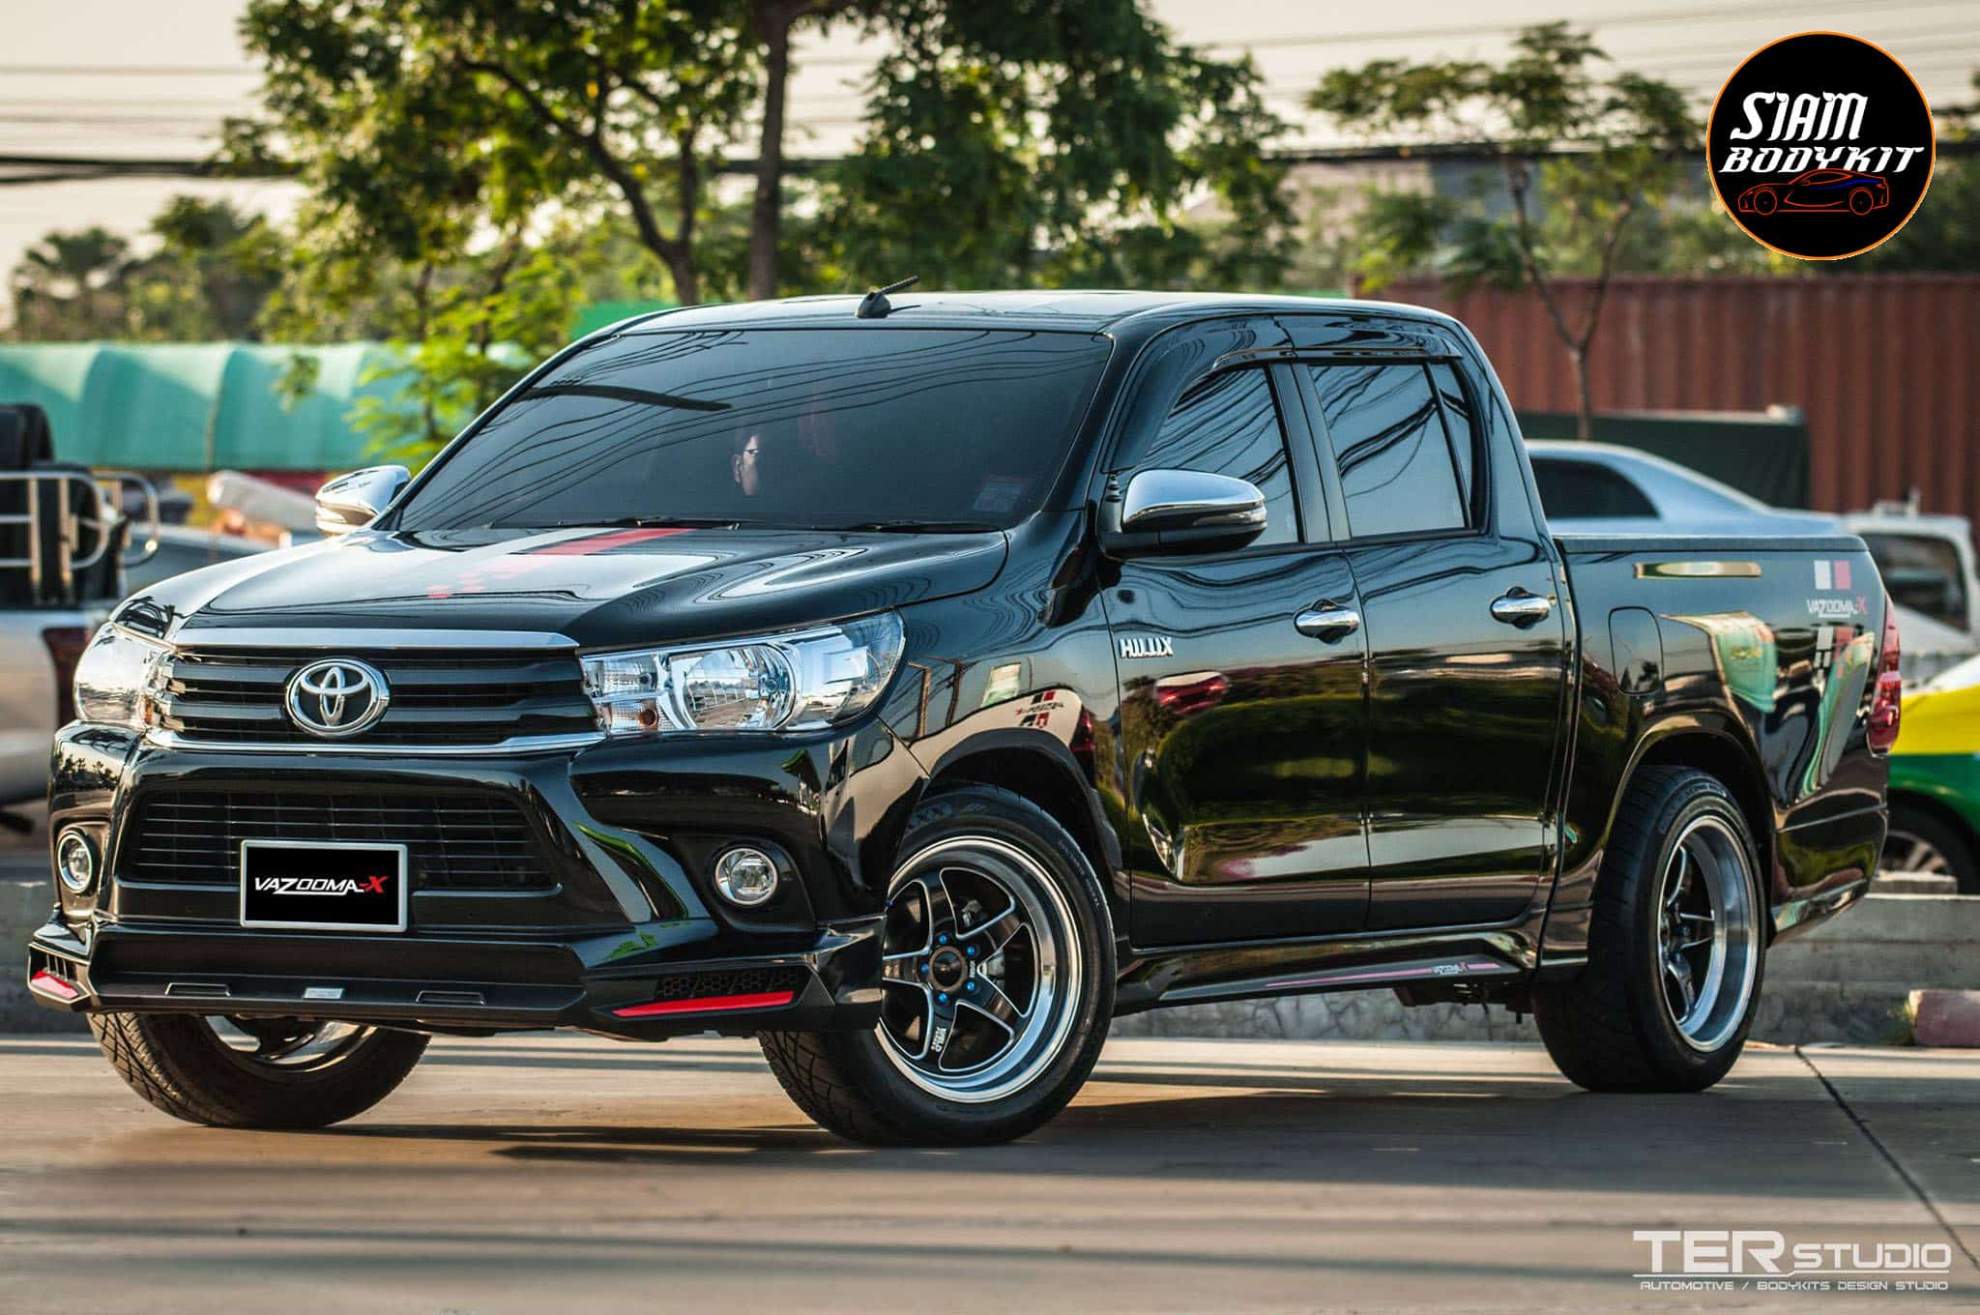 Vazooma-X Bodykit for Toyota Revo 2015-2017 Z-EDITION Double Cab (COLOR)